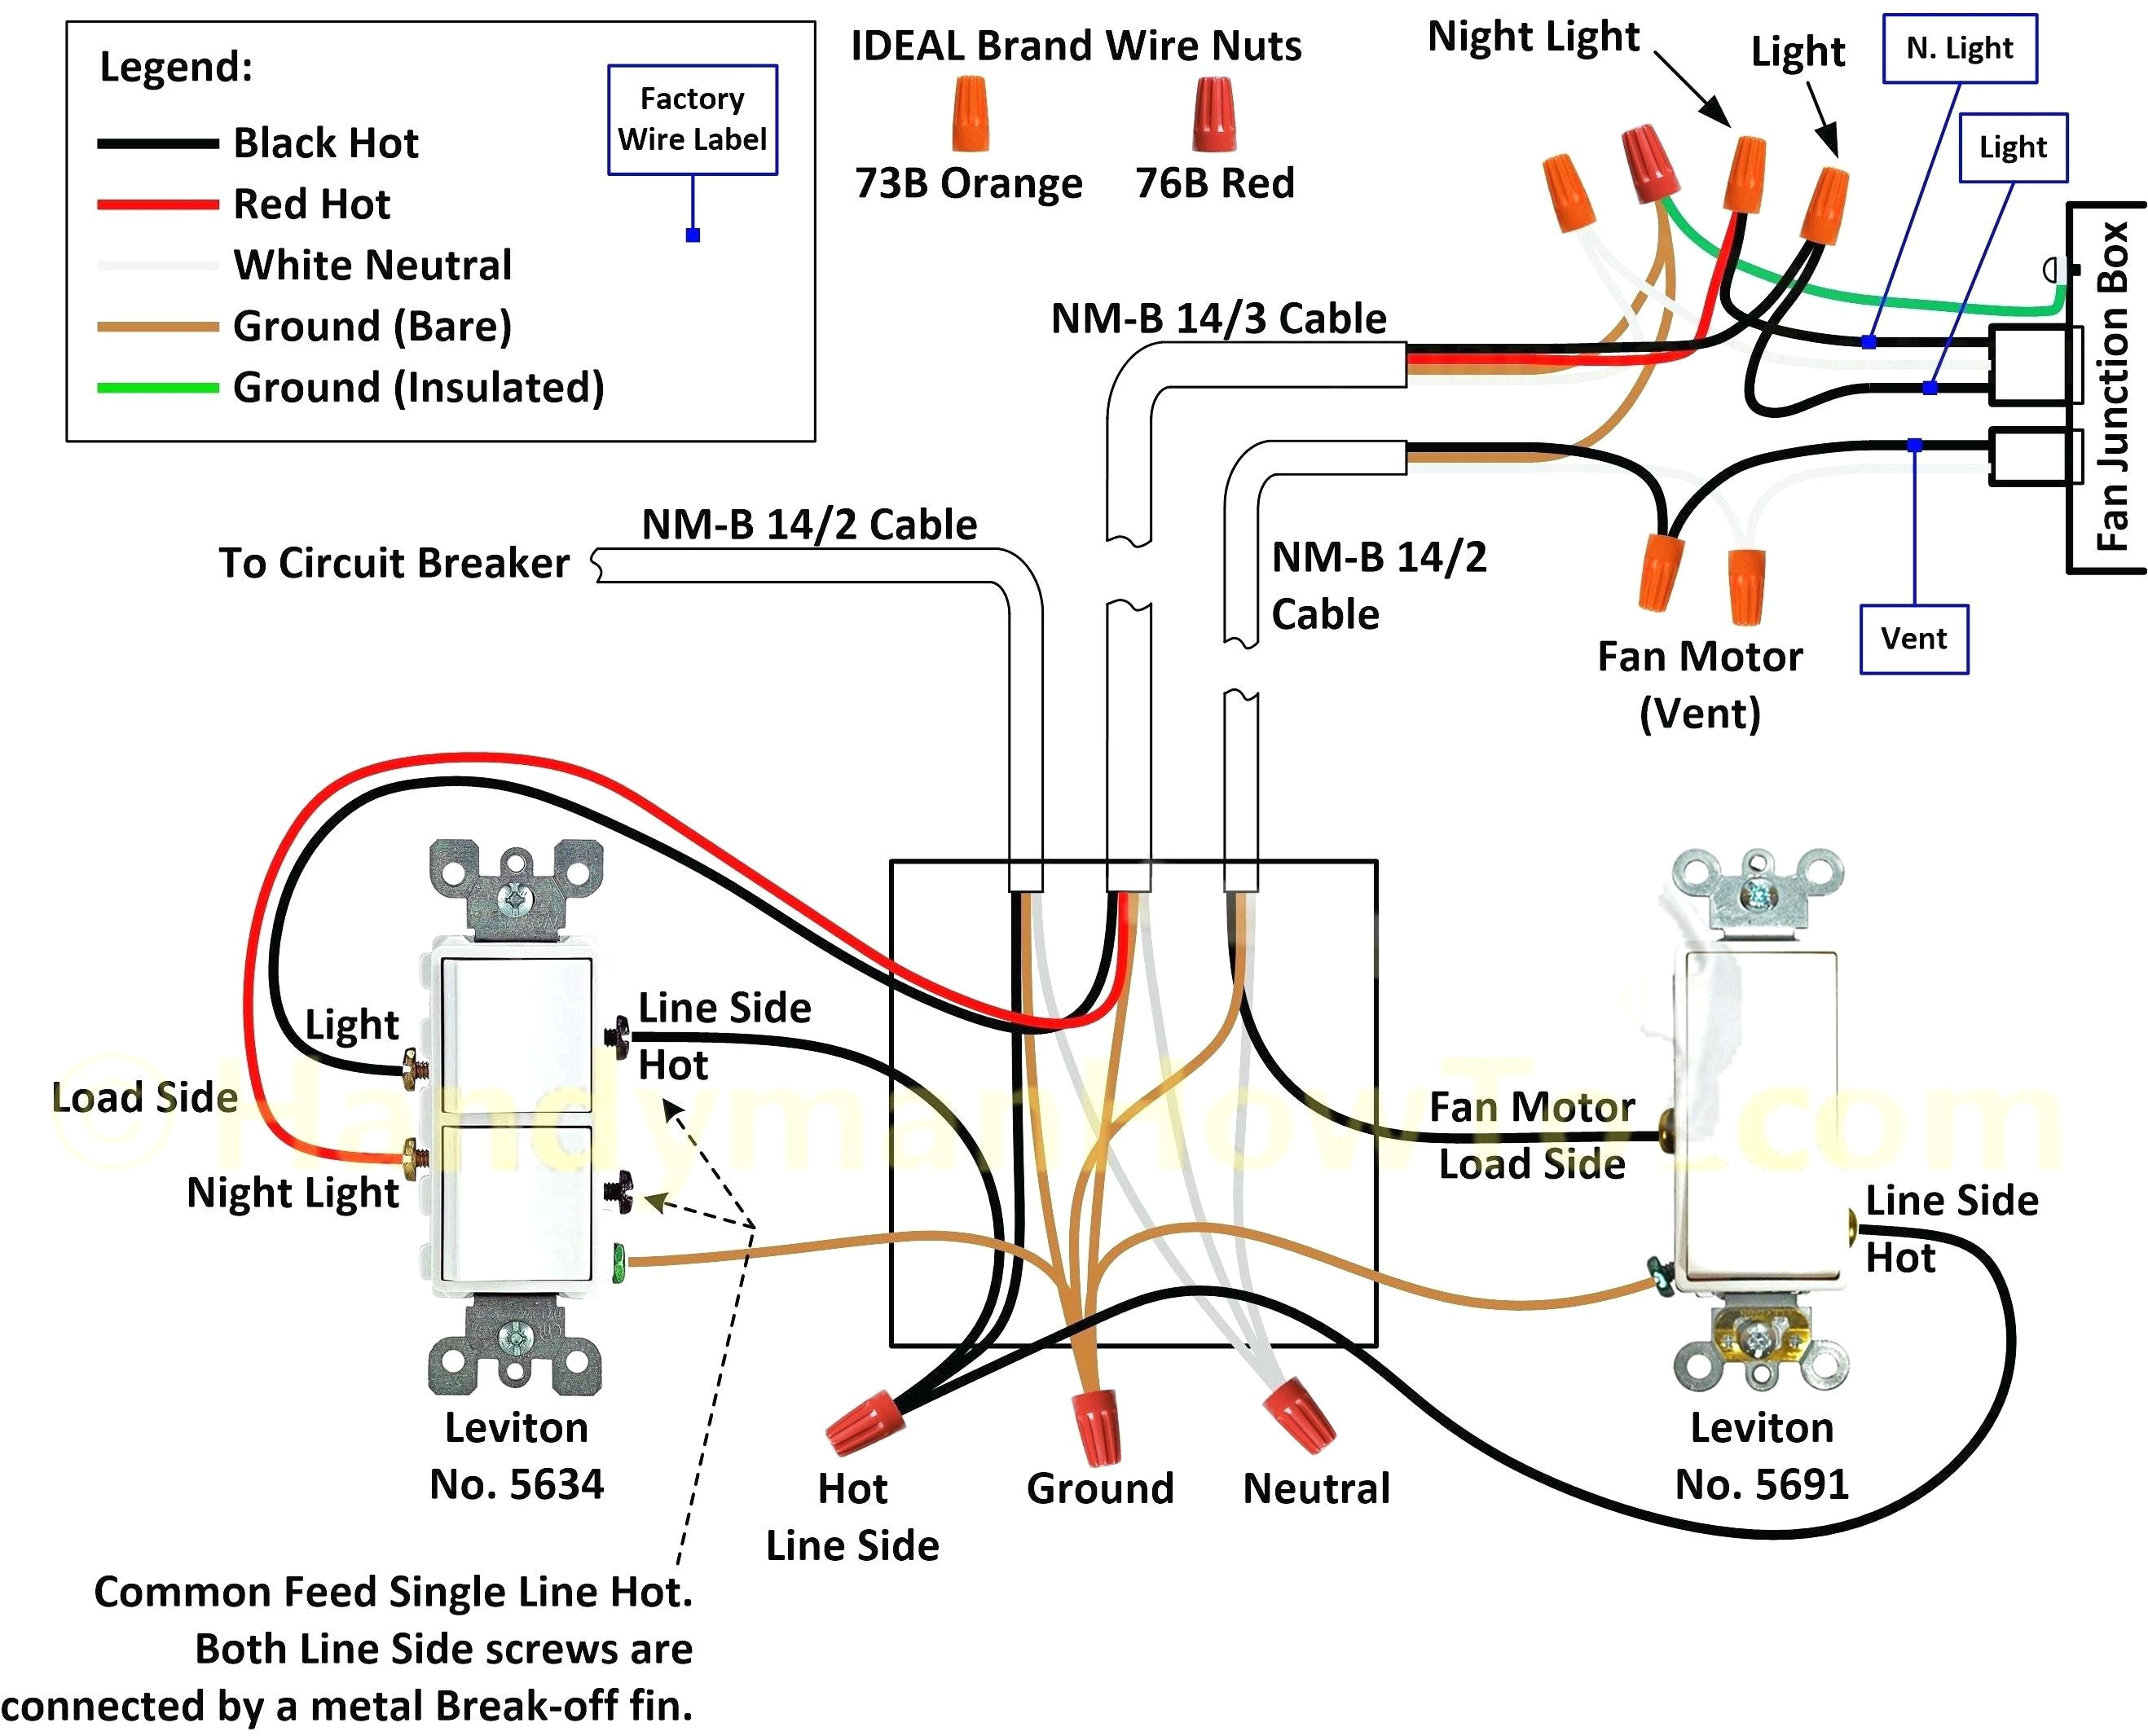 120v electrical light wiring diagrams wiring diagram val 1 way switch wiring diagram 120v electrical light